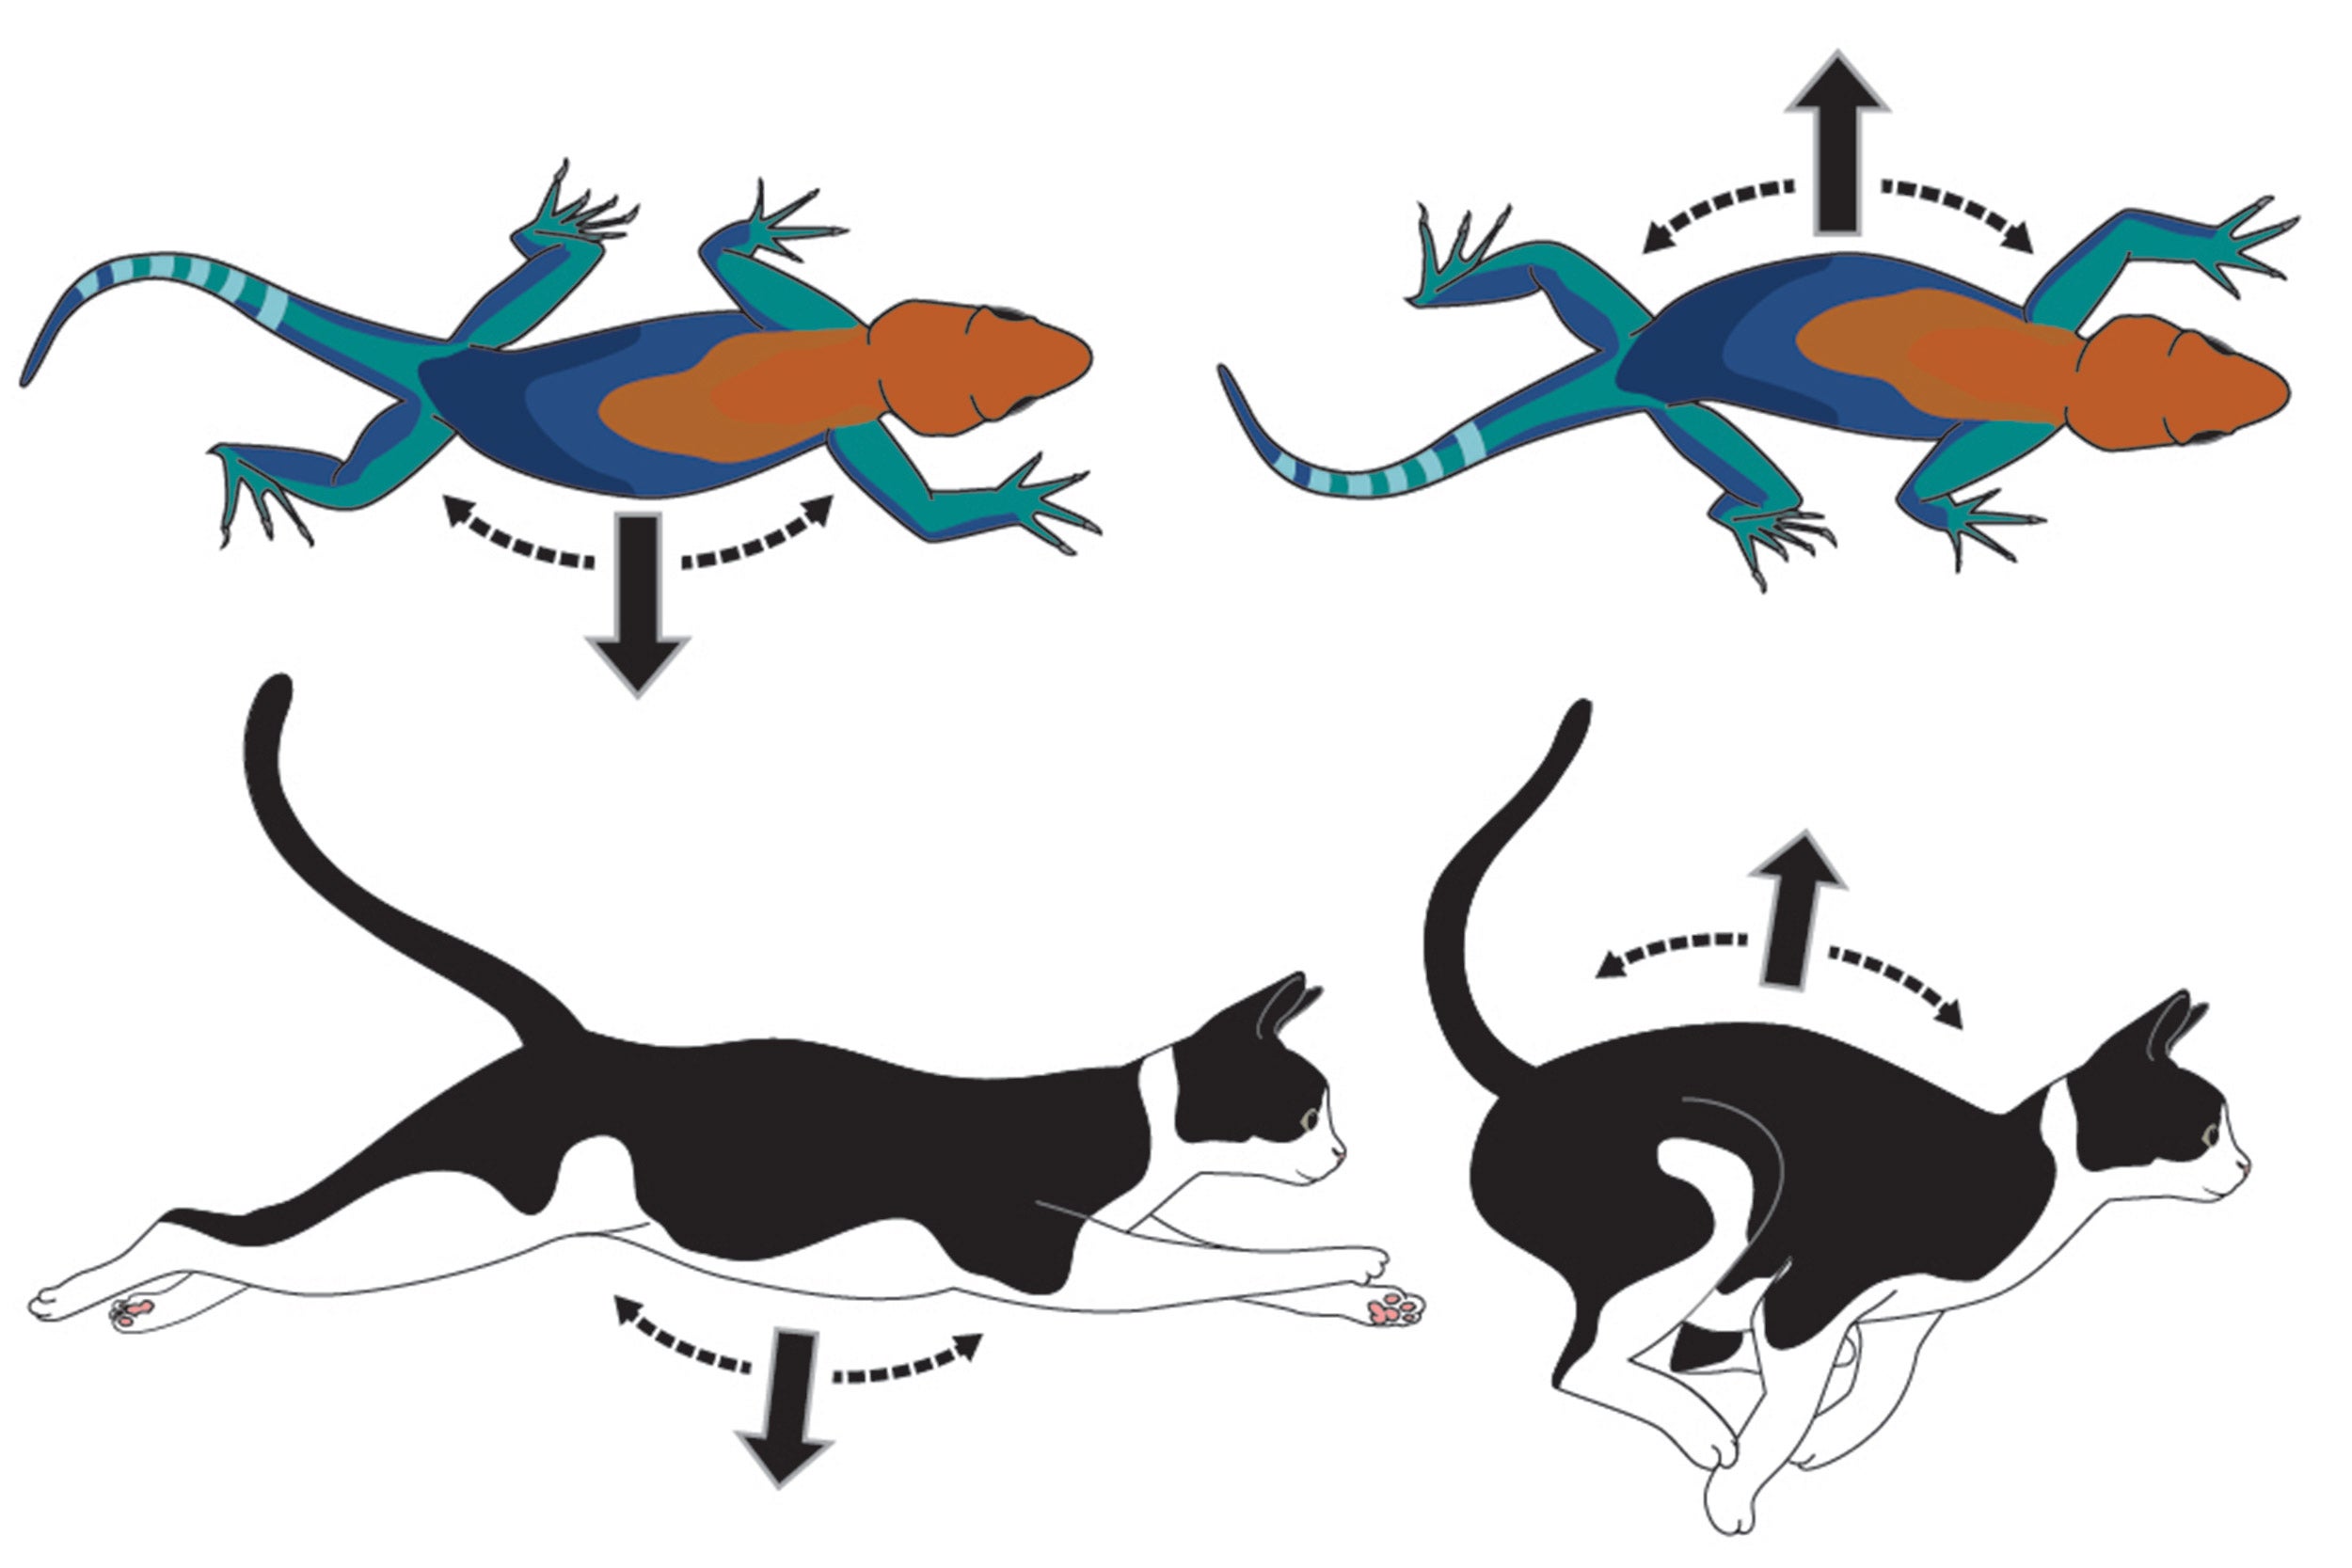 Lizard and cat movements